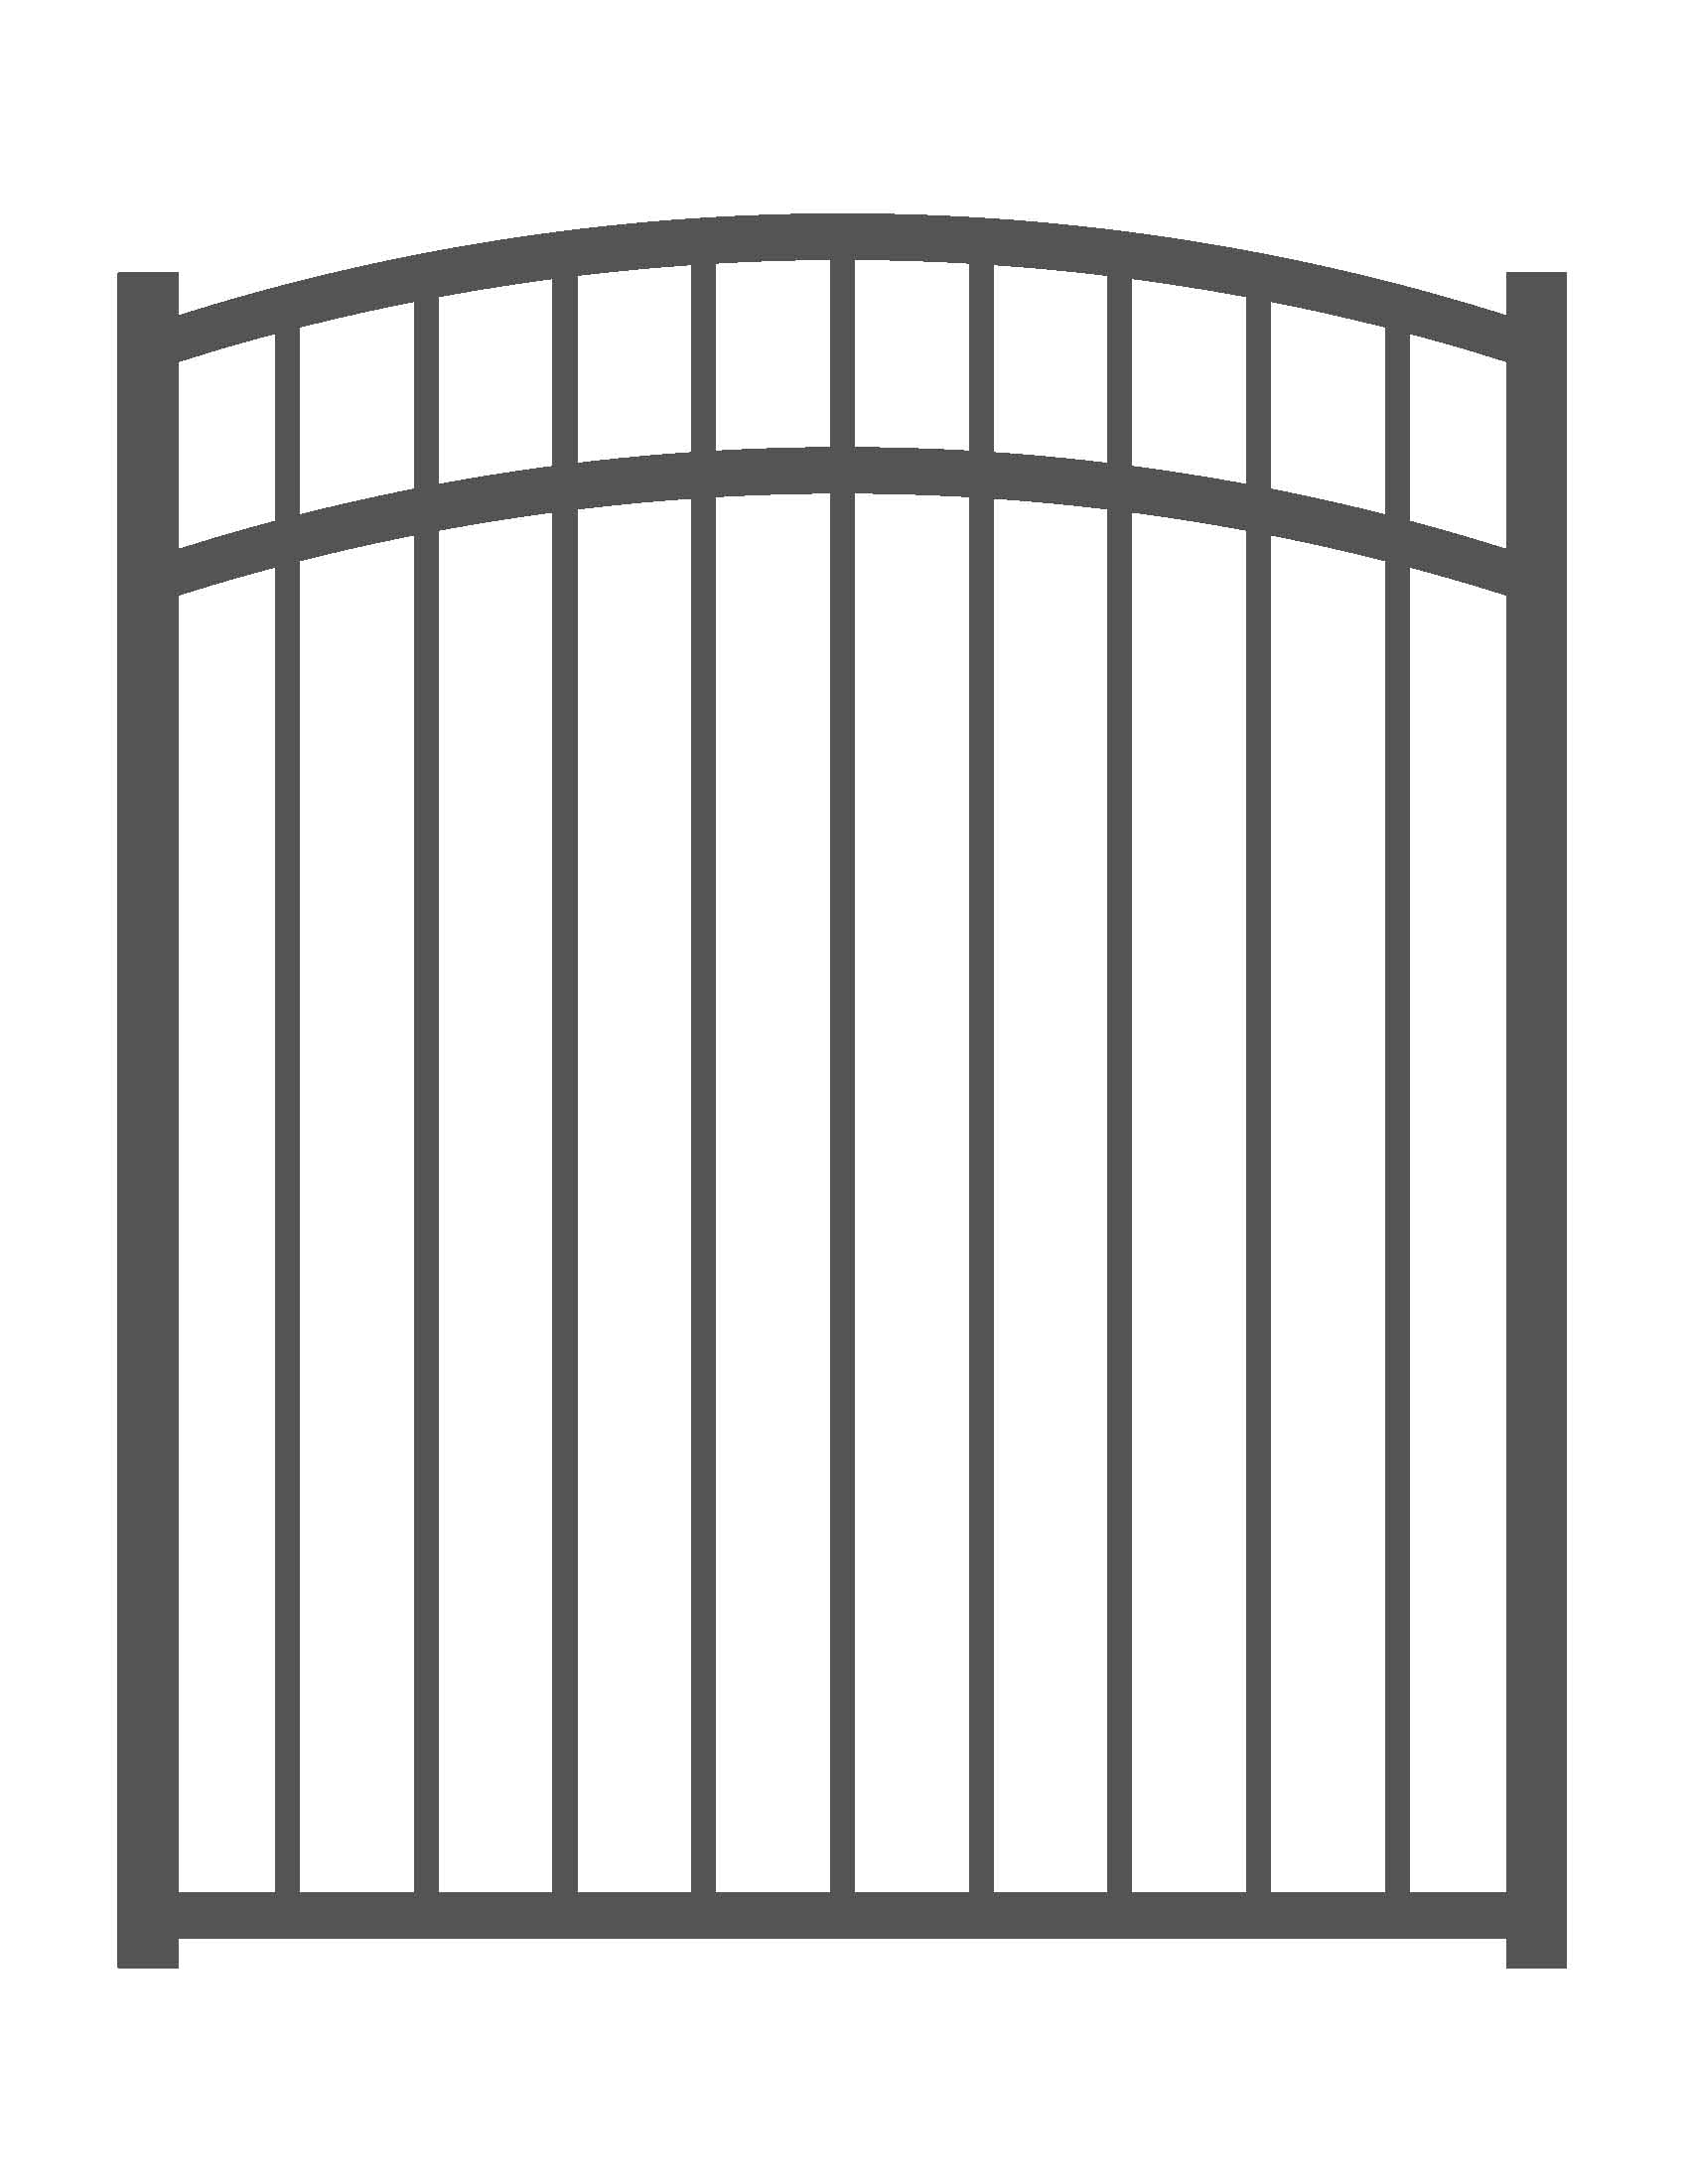 clipart of a gate - photo #13